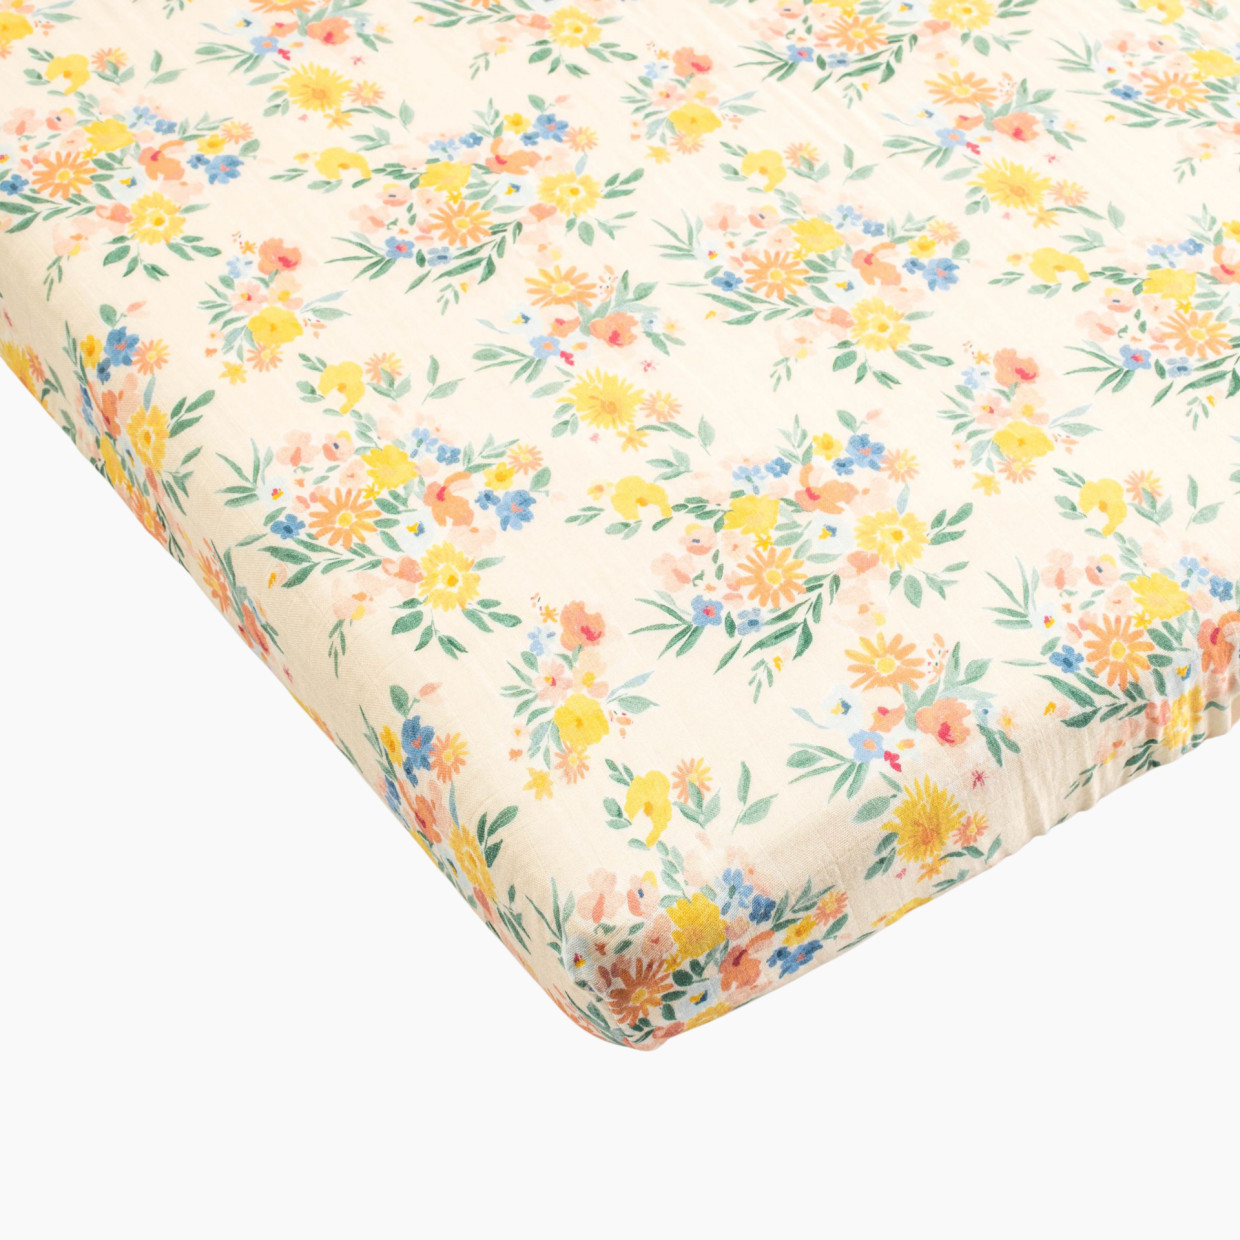 Loulou Lollipop Cotton & Bamboo Fitted Crib Sheet - Floral Bouquet.